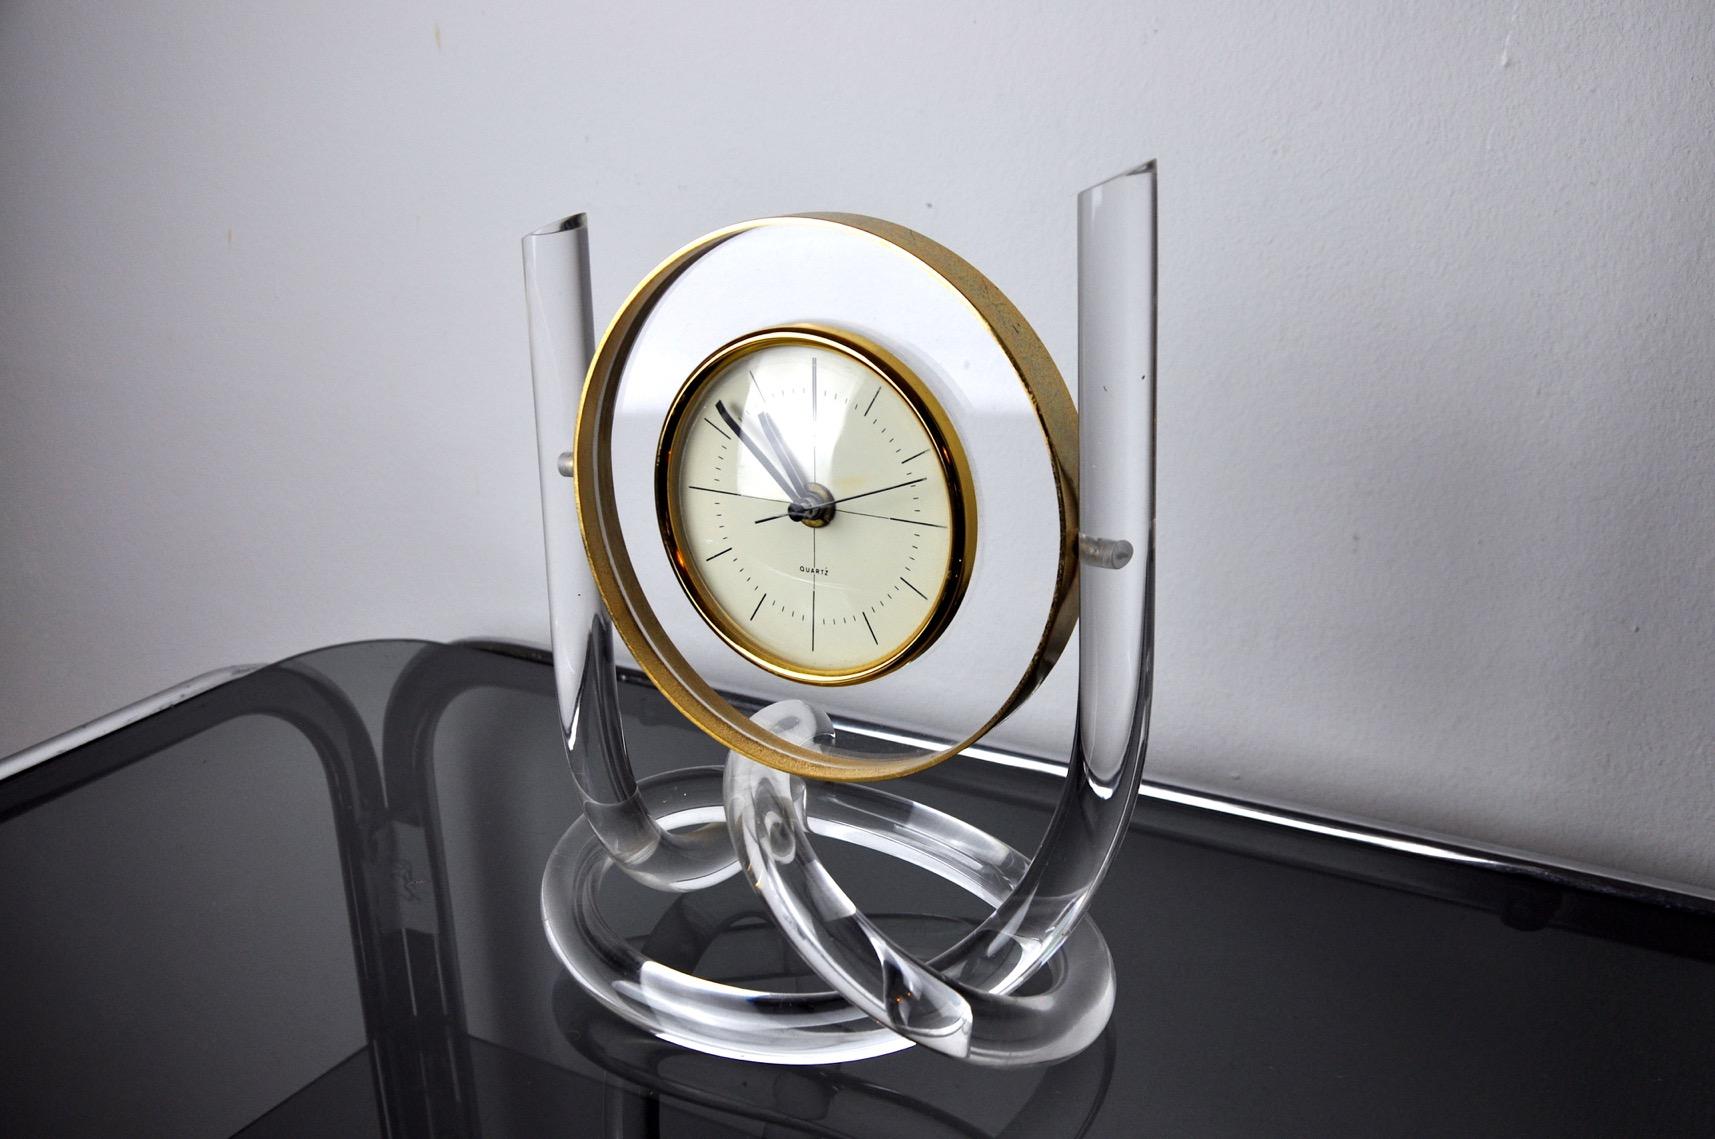 Lucite clock from the 1970s with a golden colored brass support. Hollywood Regency era. Superb design and vintage object to decorate your interior.
 